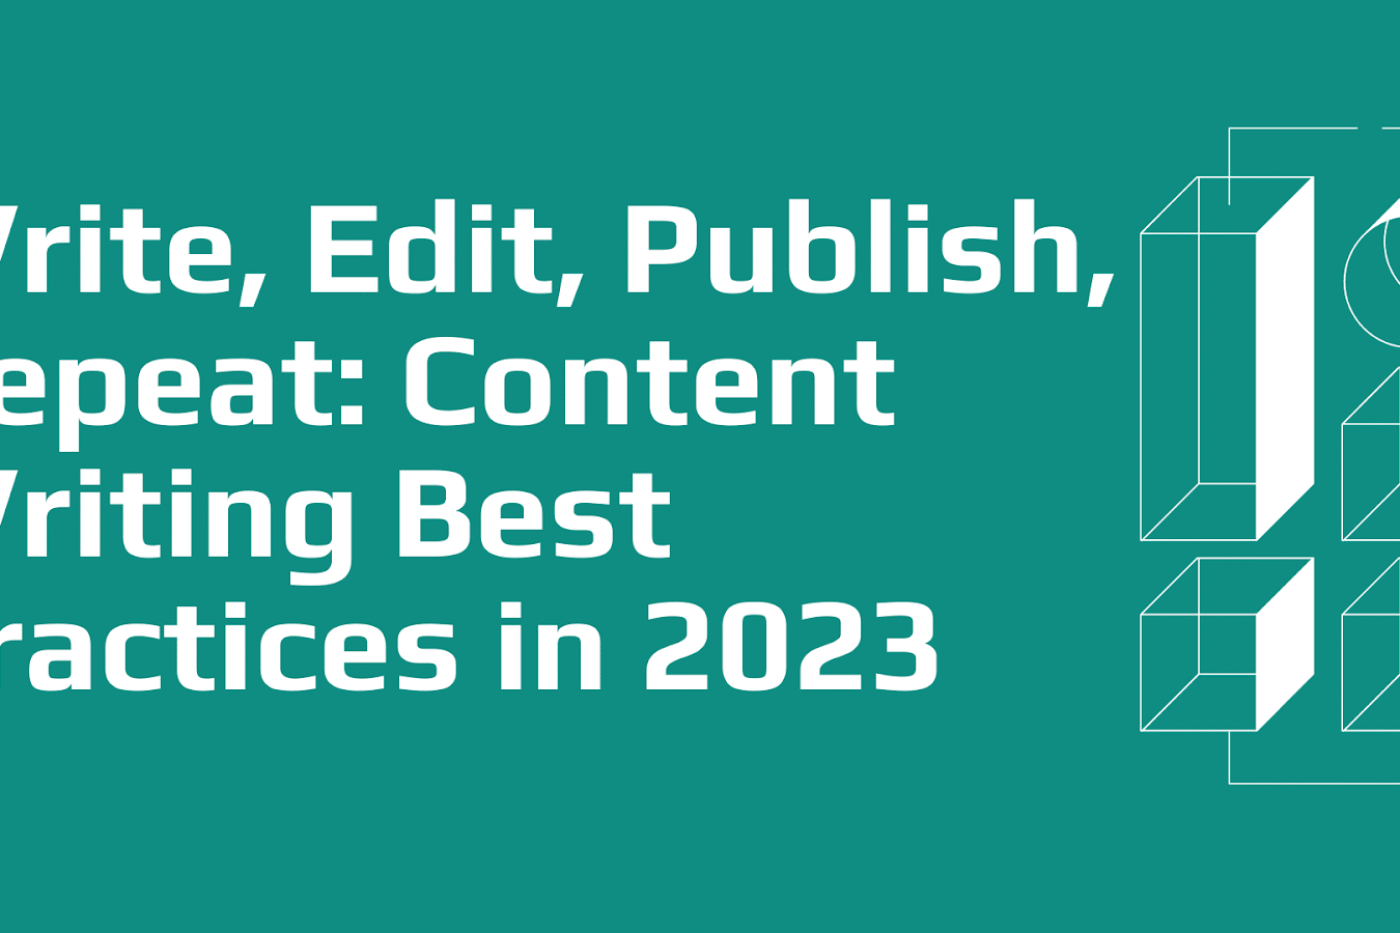 Write, Edit, Publish, Repeat: Mastering Content Writing Best Practices